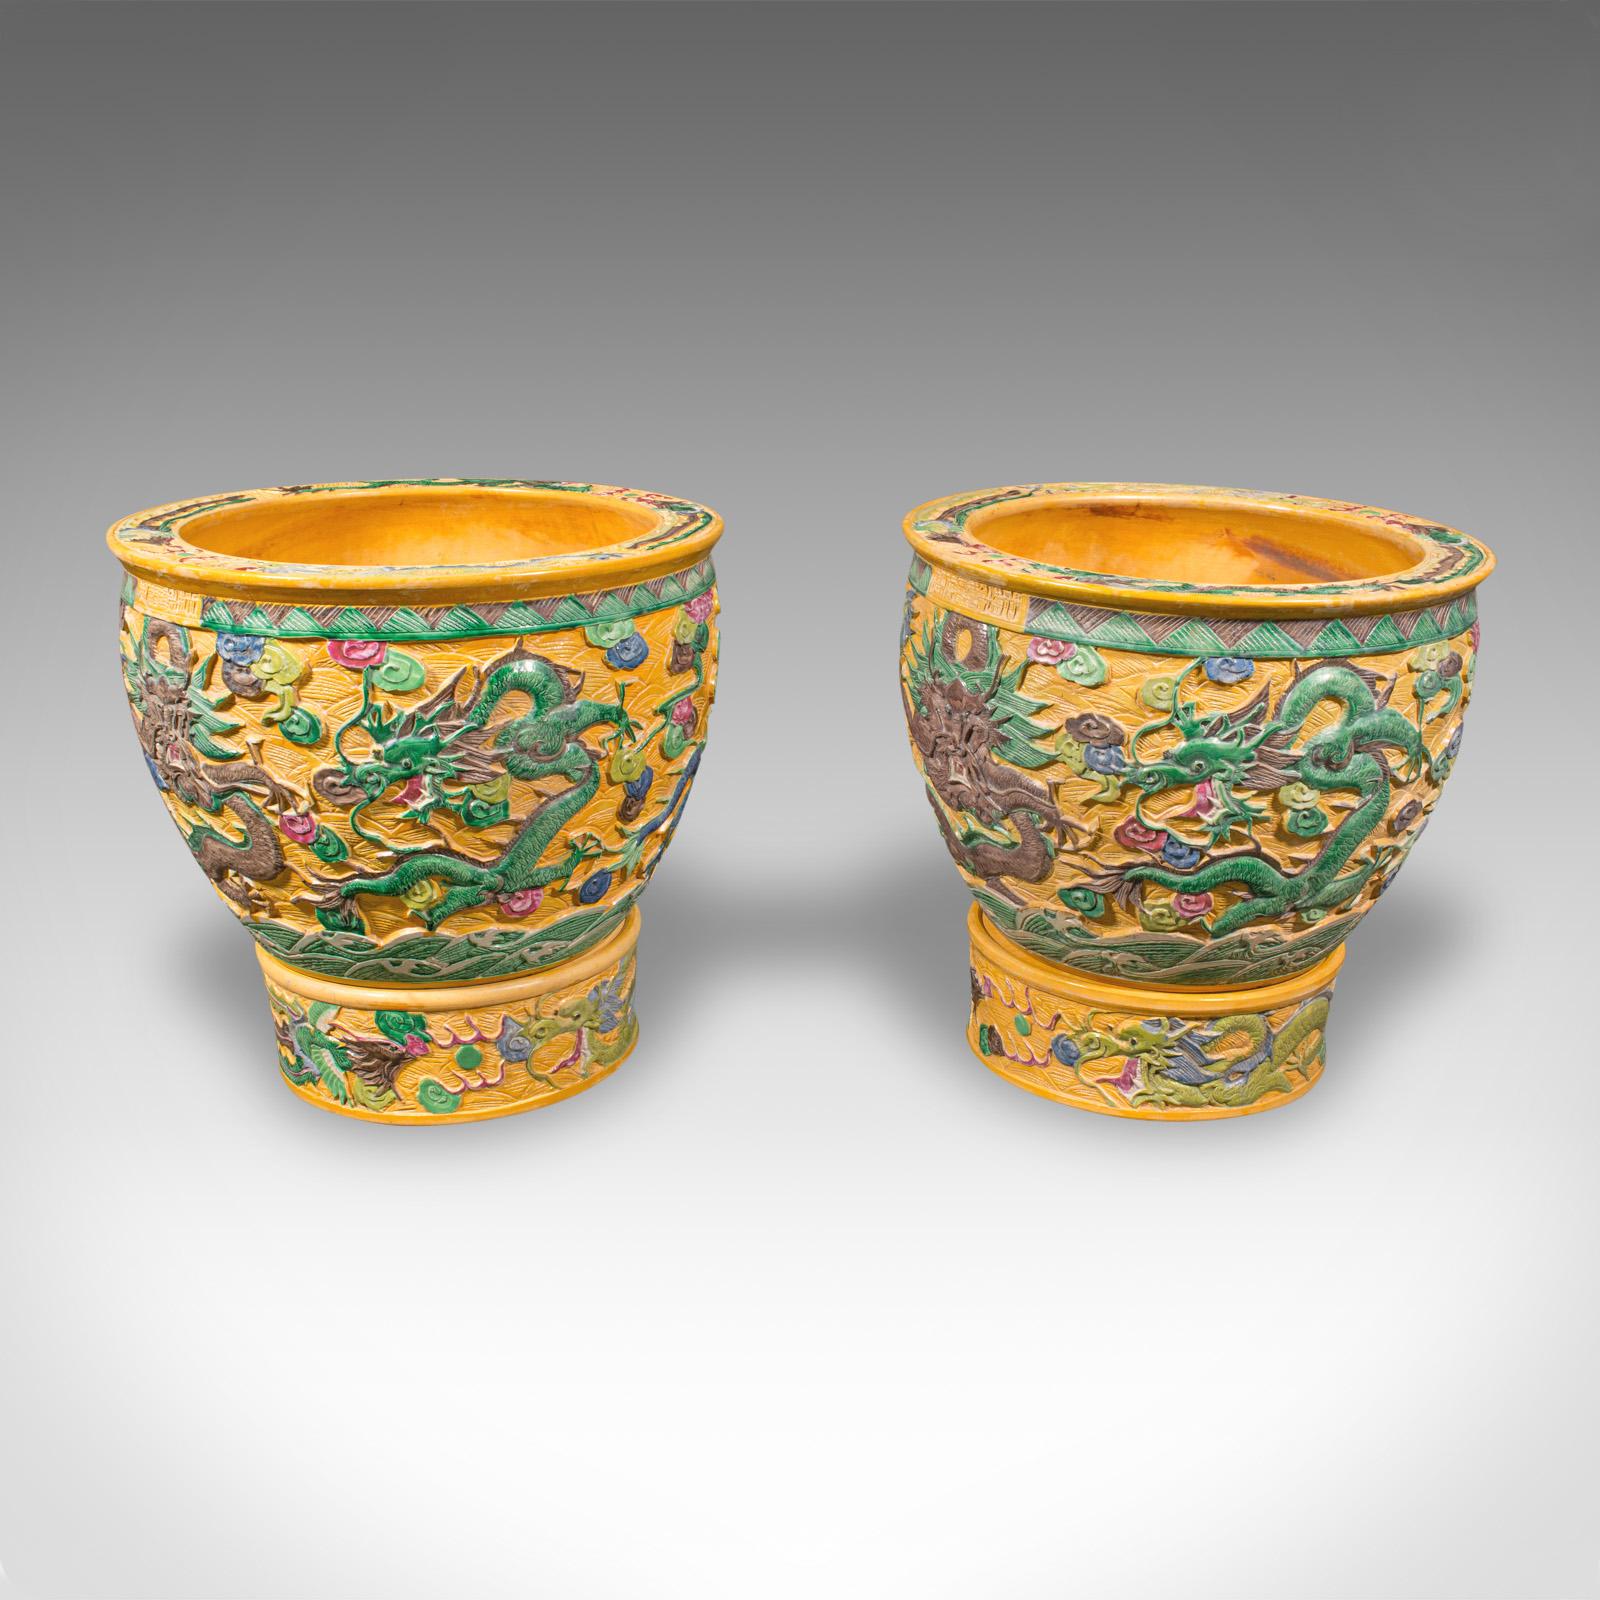 This is a pair of large vintage planters. A Chinese, relief ceramic decorative jardiniere, dating to the Art Deco period, circa 1930.

Delightfully substantial statement planters for the hall or lounge
Displaying a desirable aged patina and in good